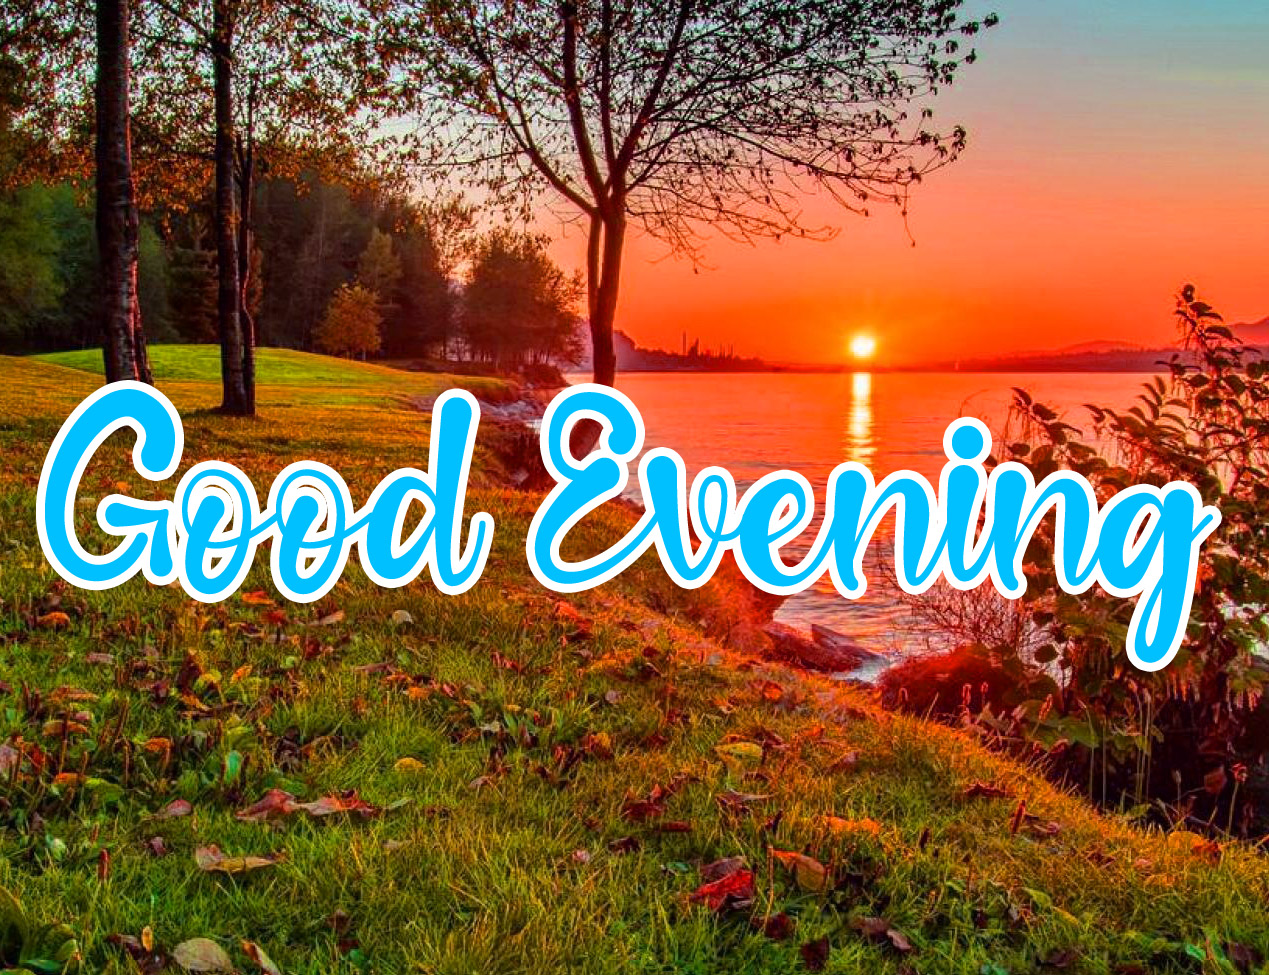 Free Sweet good evening images Photo Download 